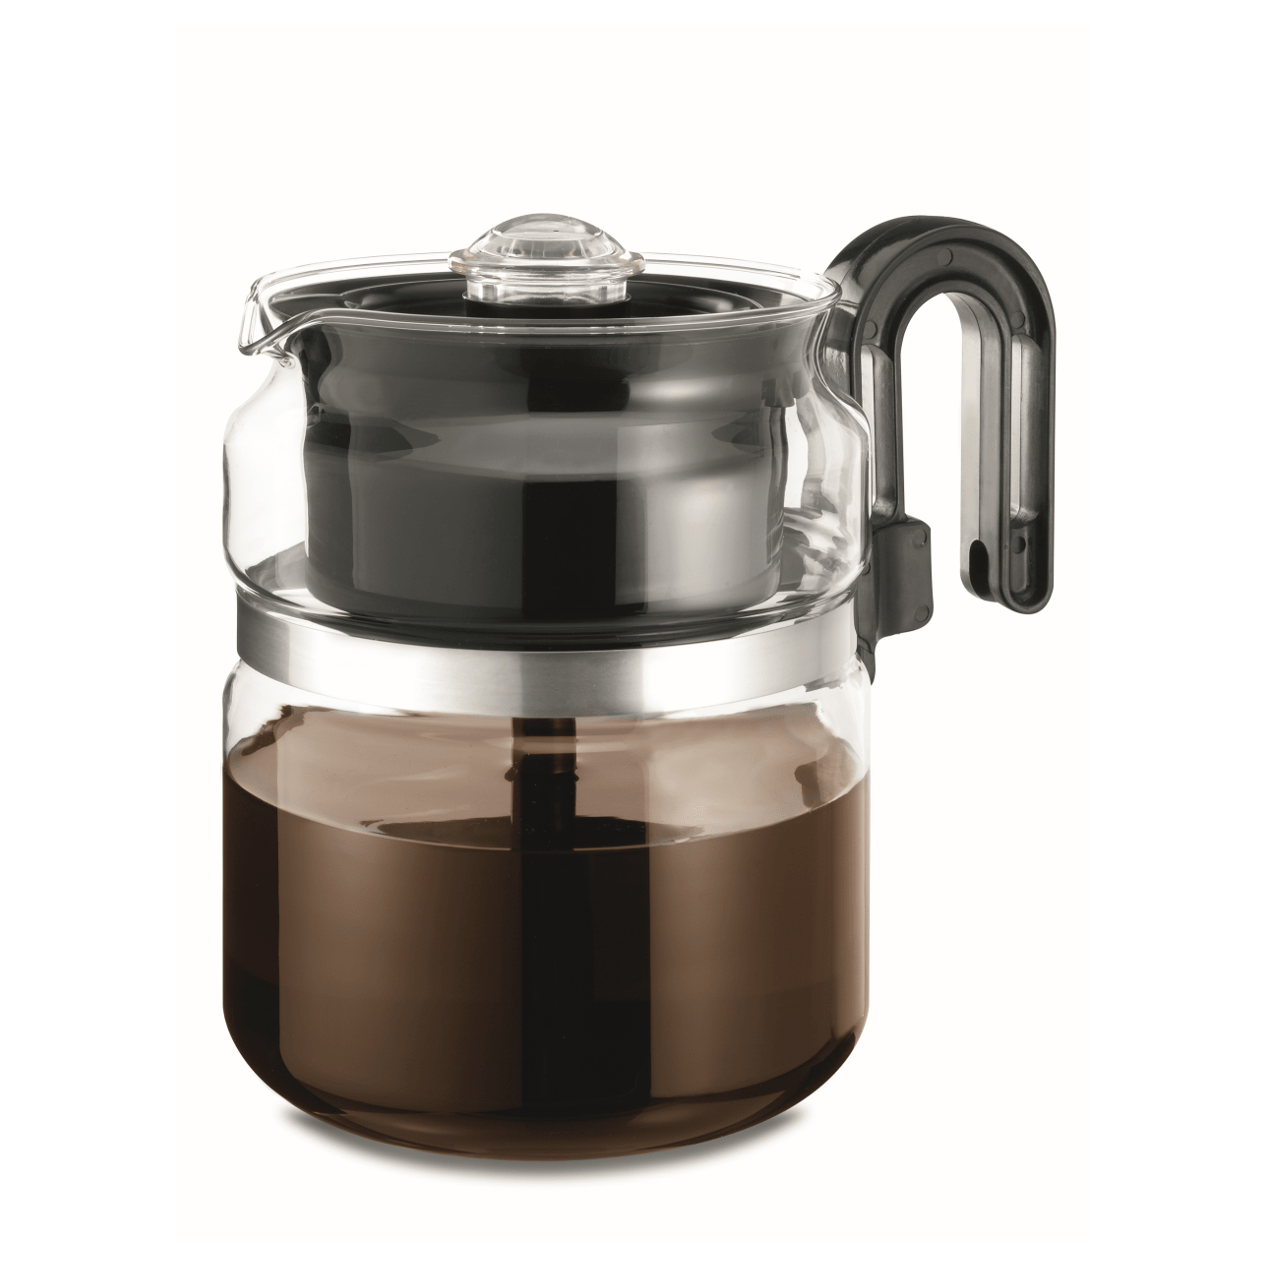 https://cafe-brew.com/wp-content/uploads/2020/05/Stovetop-Coffee-Percolator-min.png